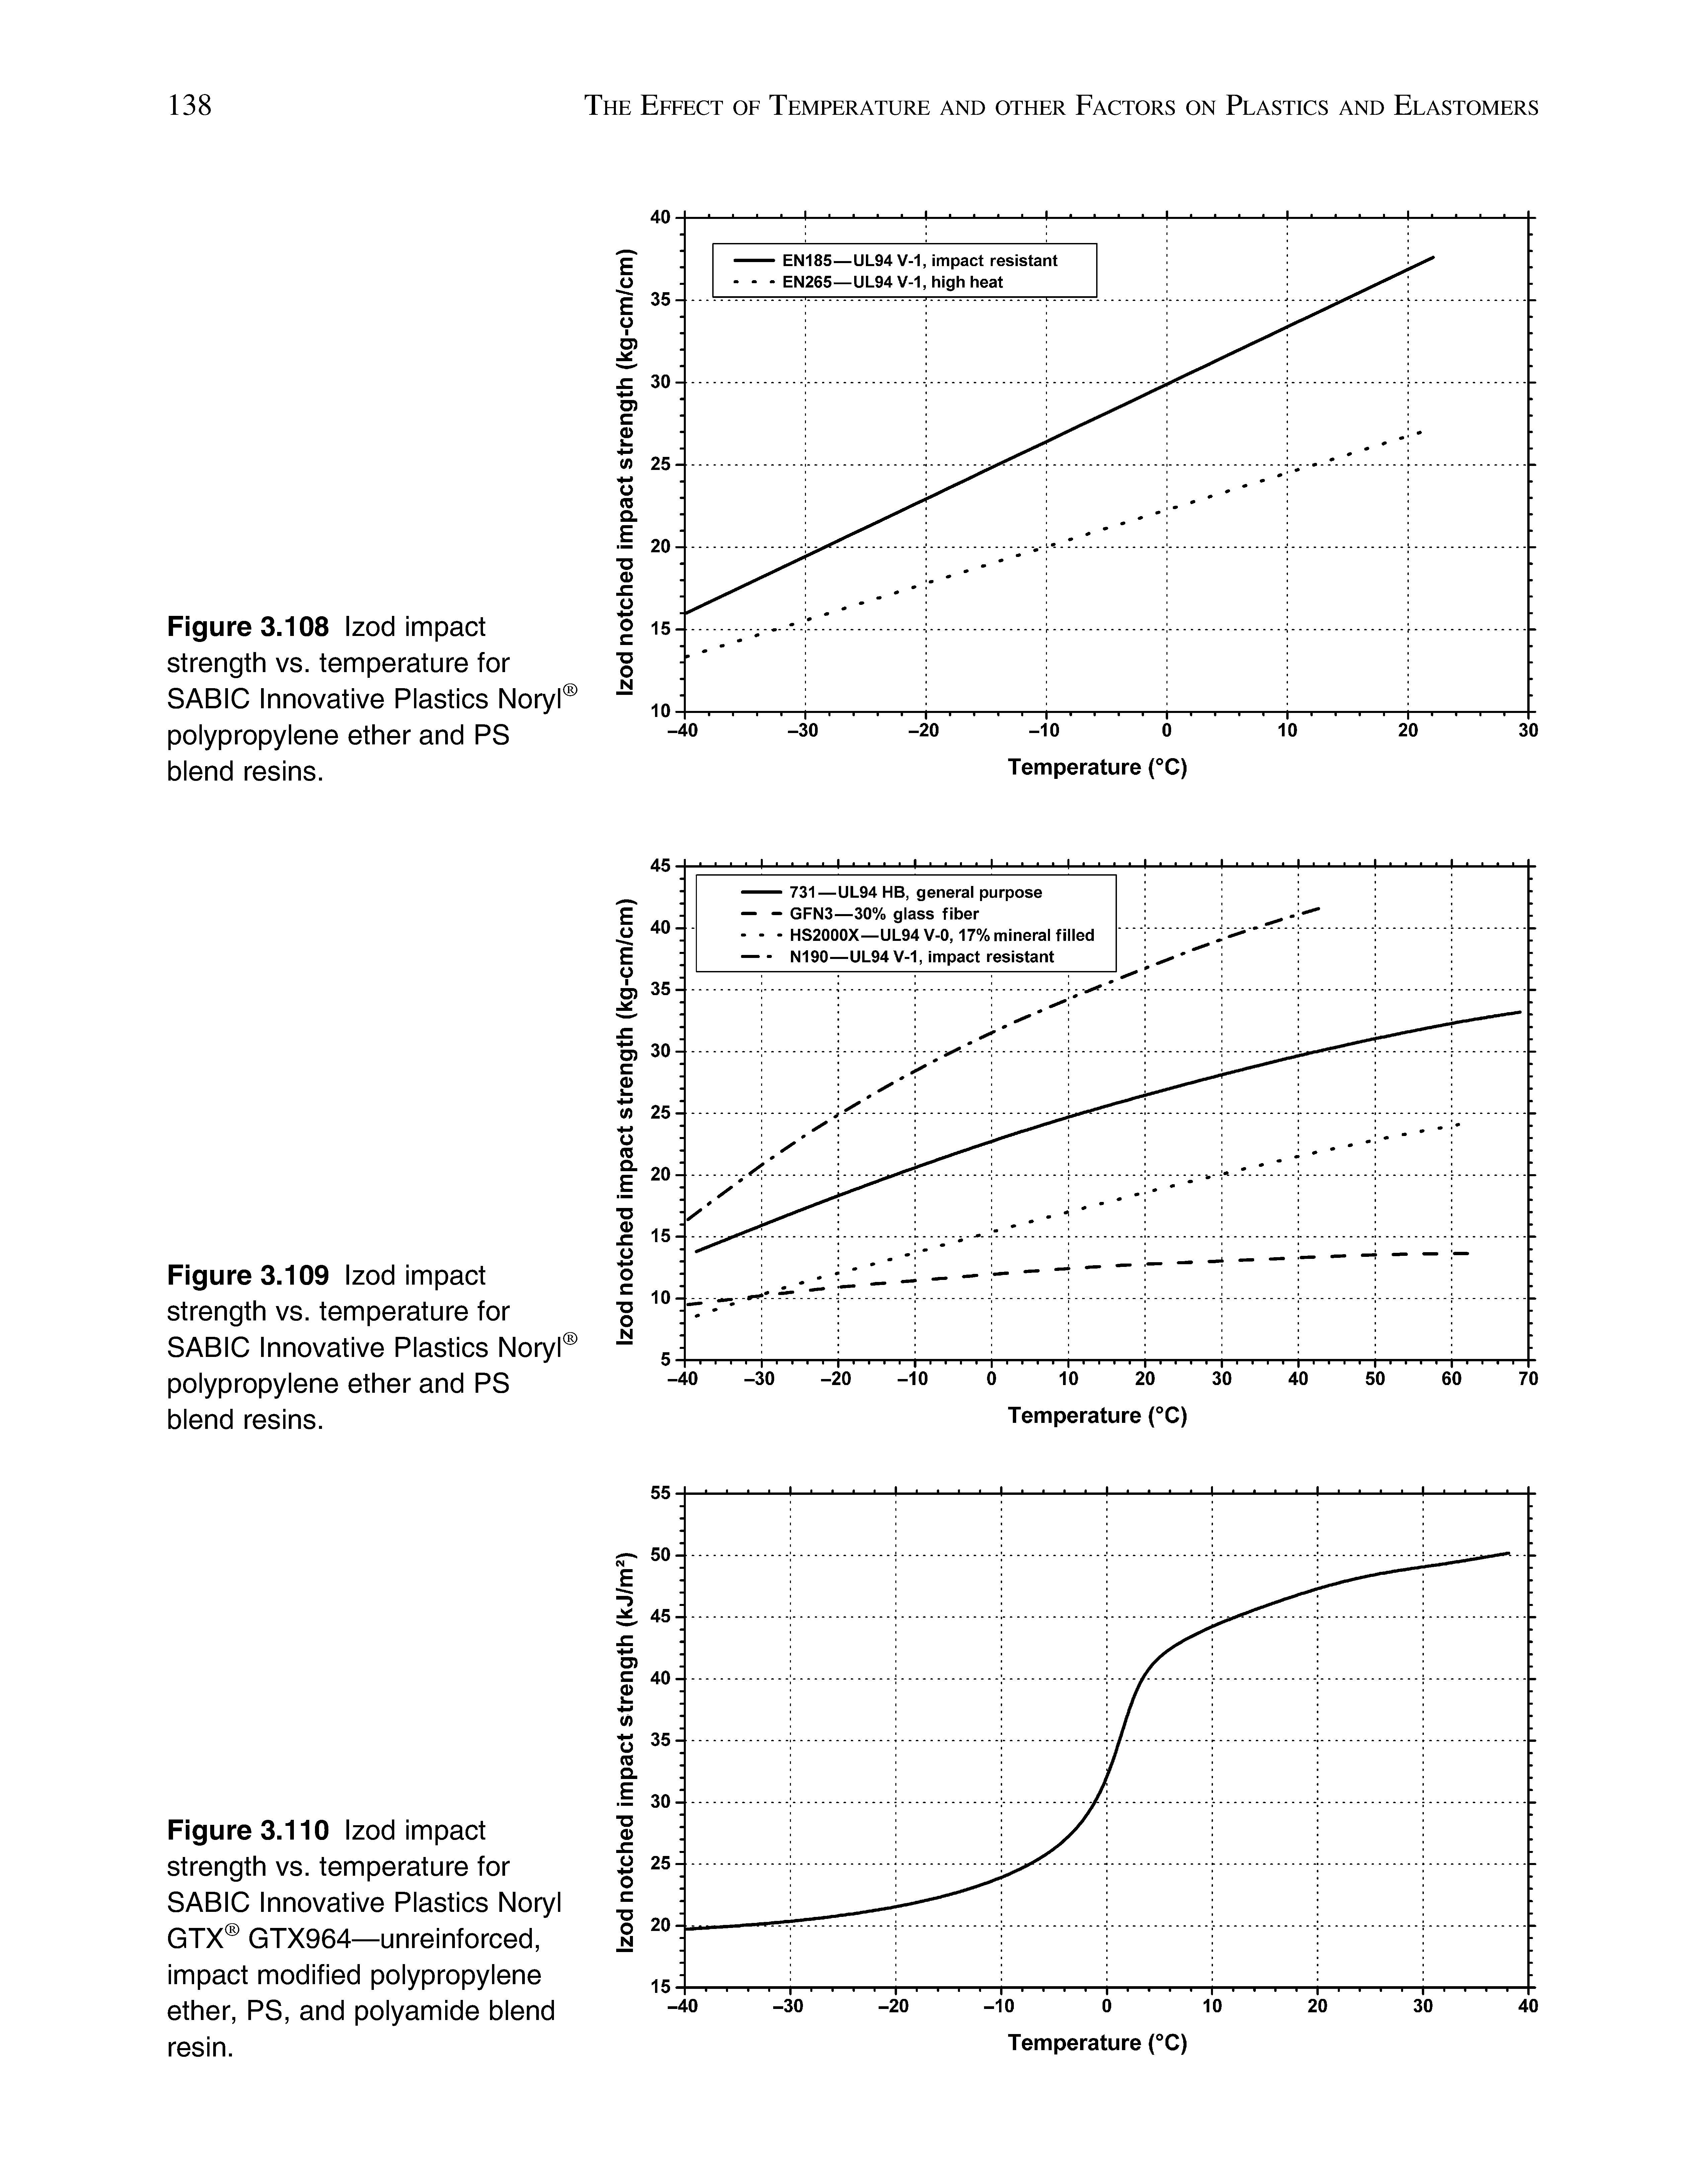 Figure 3.110 Izod impact strength vs. temperature for SABIC Innovative Plastics Noryl GTX GTX964—unreinforced, impact modified polypropylene ether, PS, and polyamide blend resin.